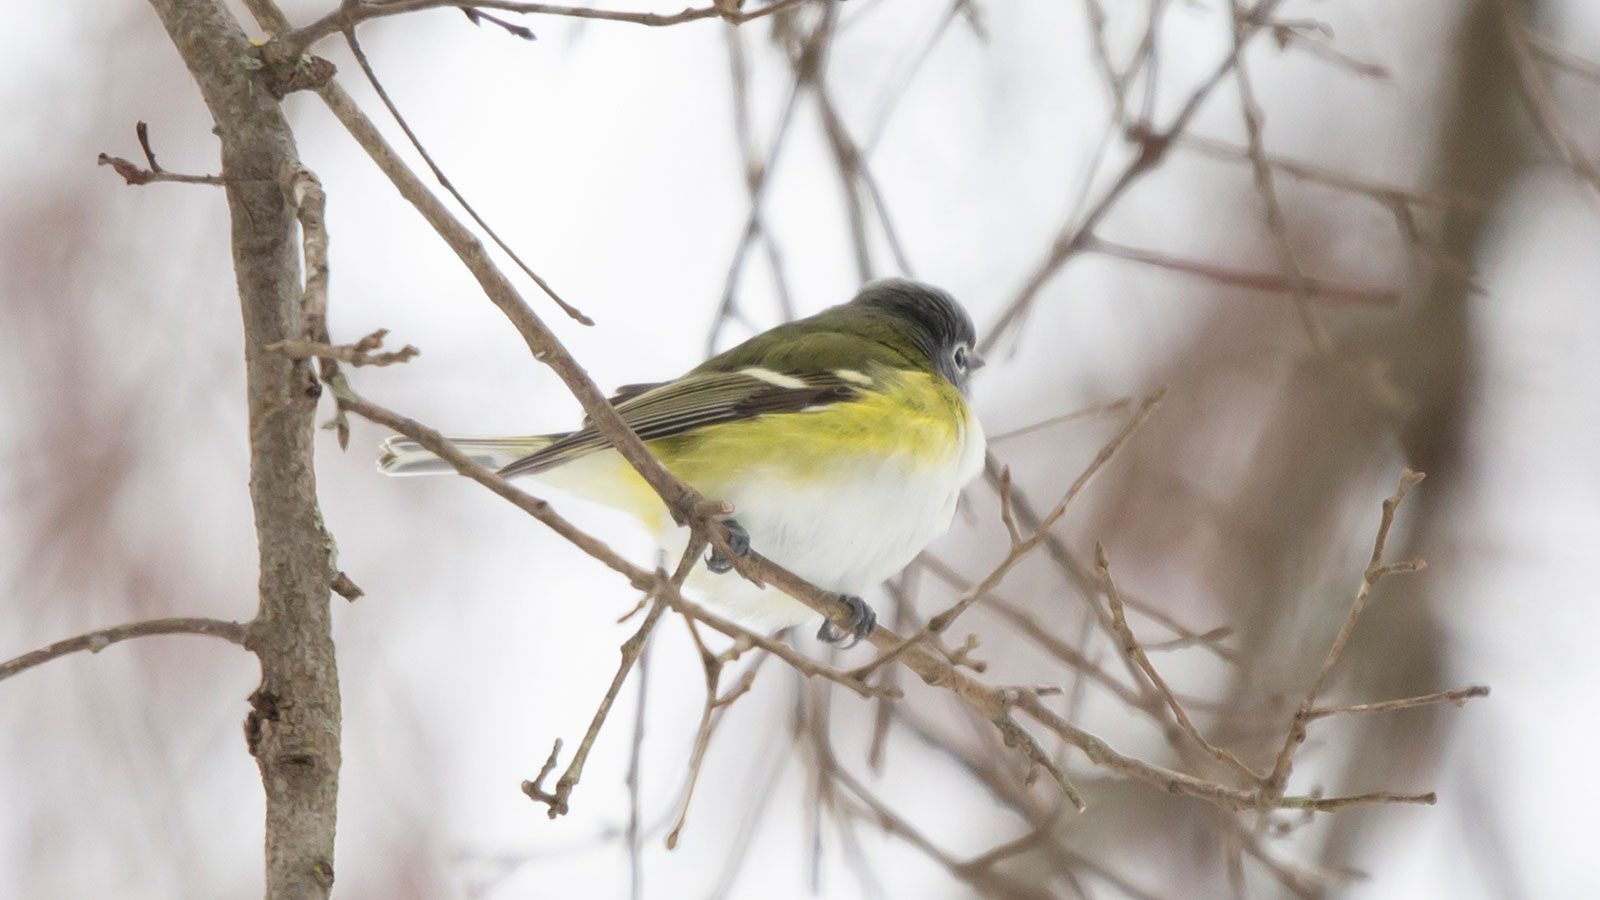 Blue-headed vireo perched on a bare branch